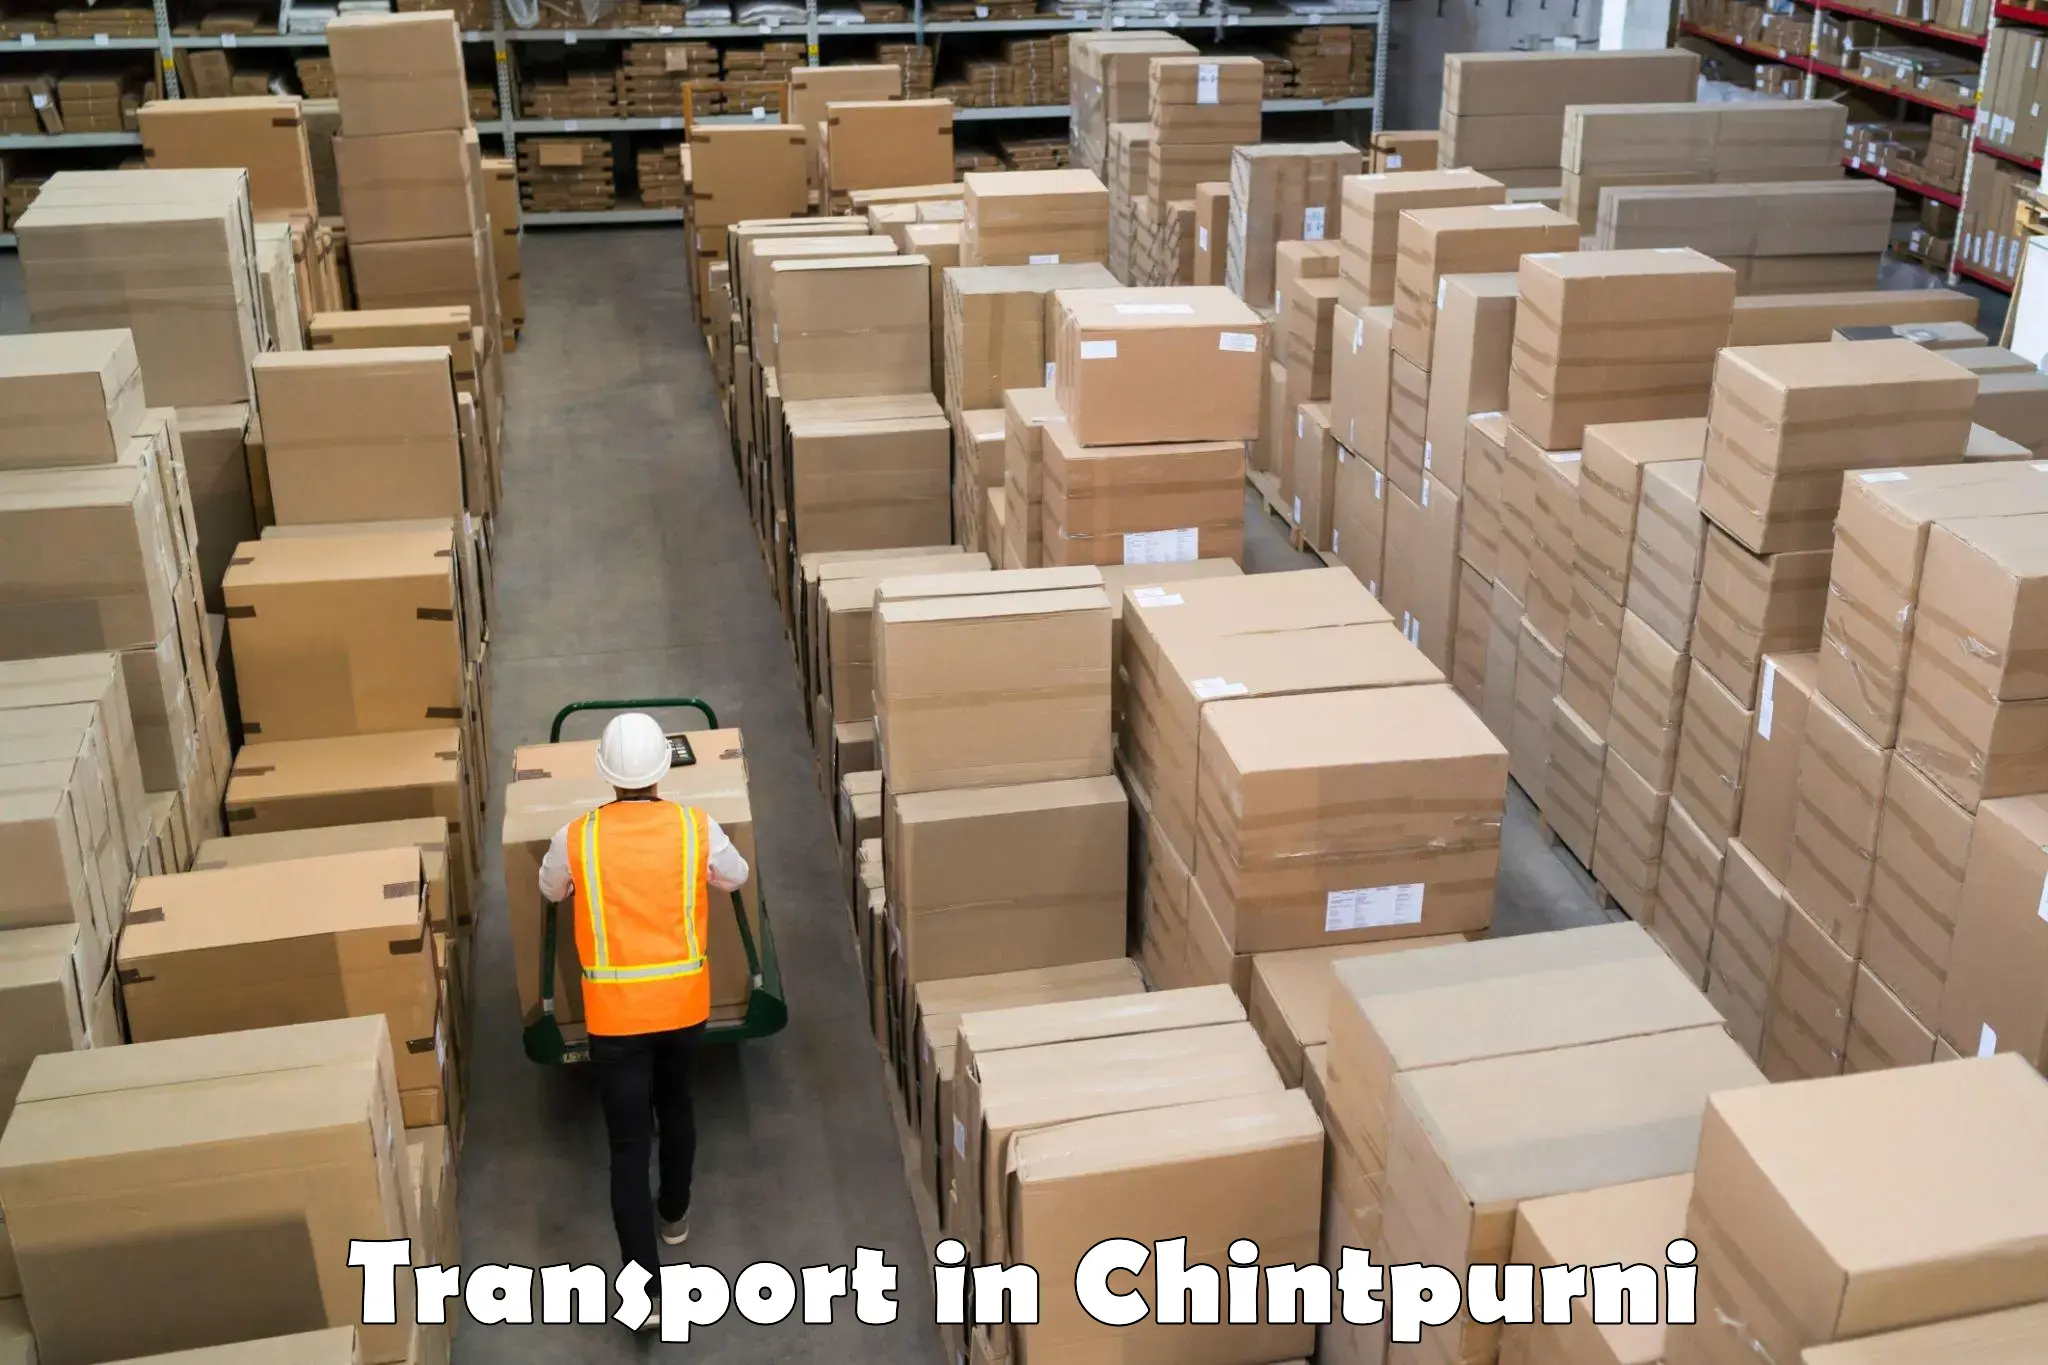 Daily parcel service transport in Chintpurni